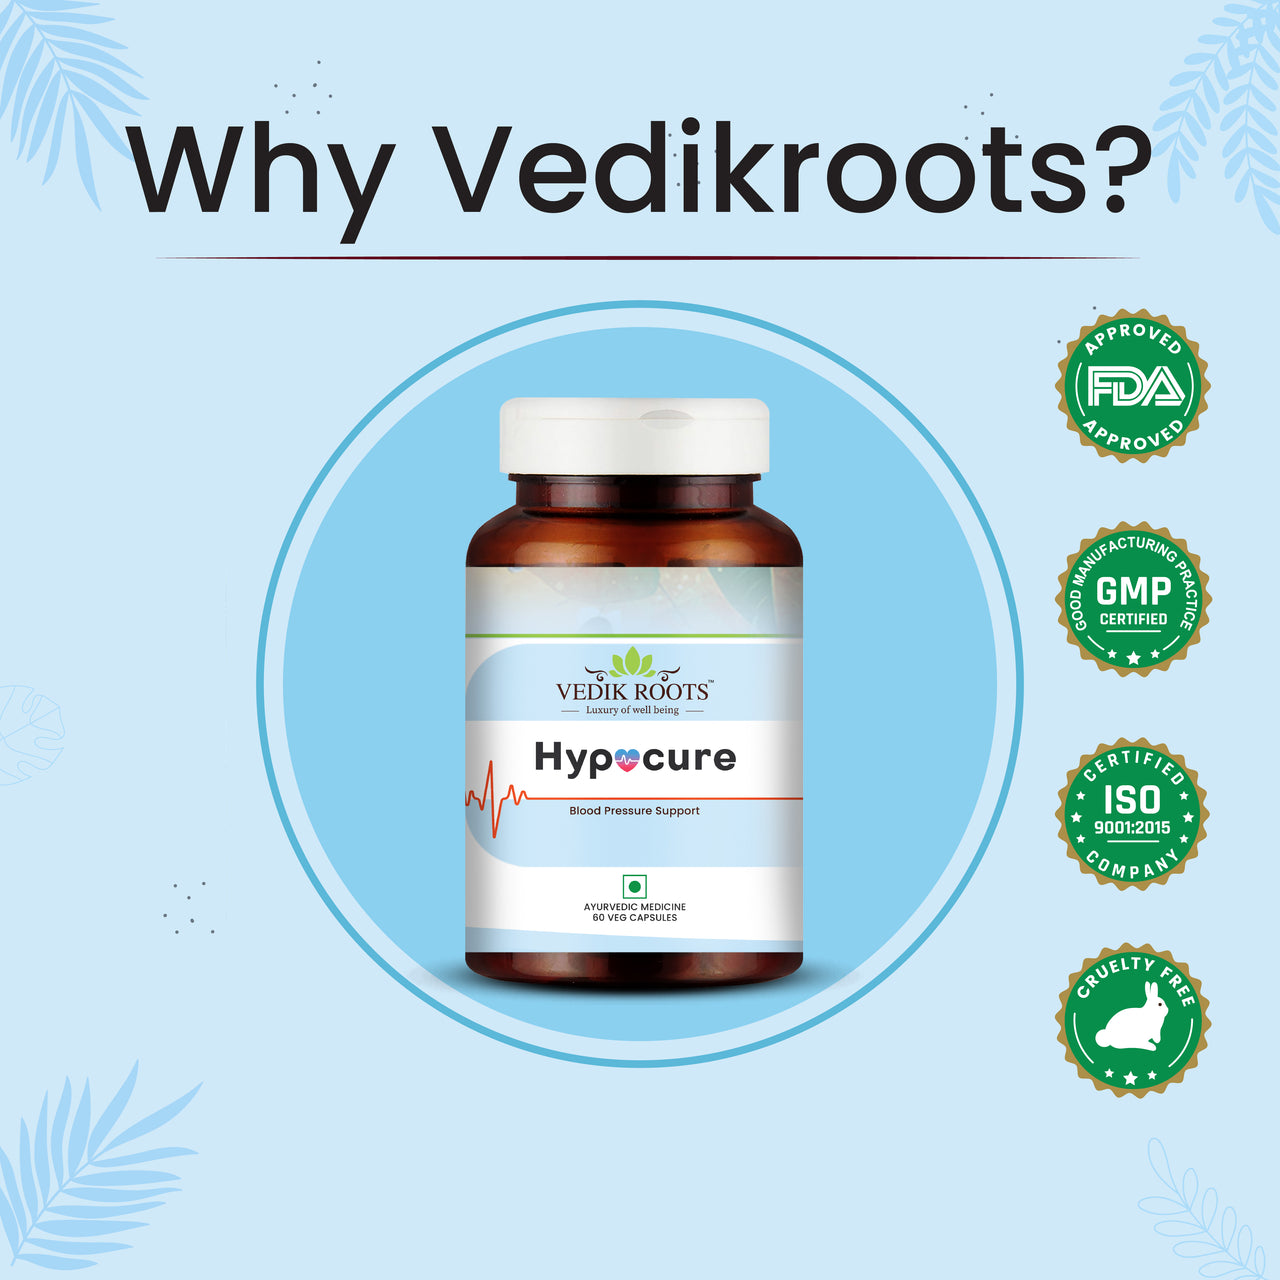 Quality Assurance of Hypocure Capsules | Vedikroots